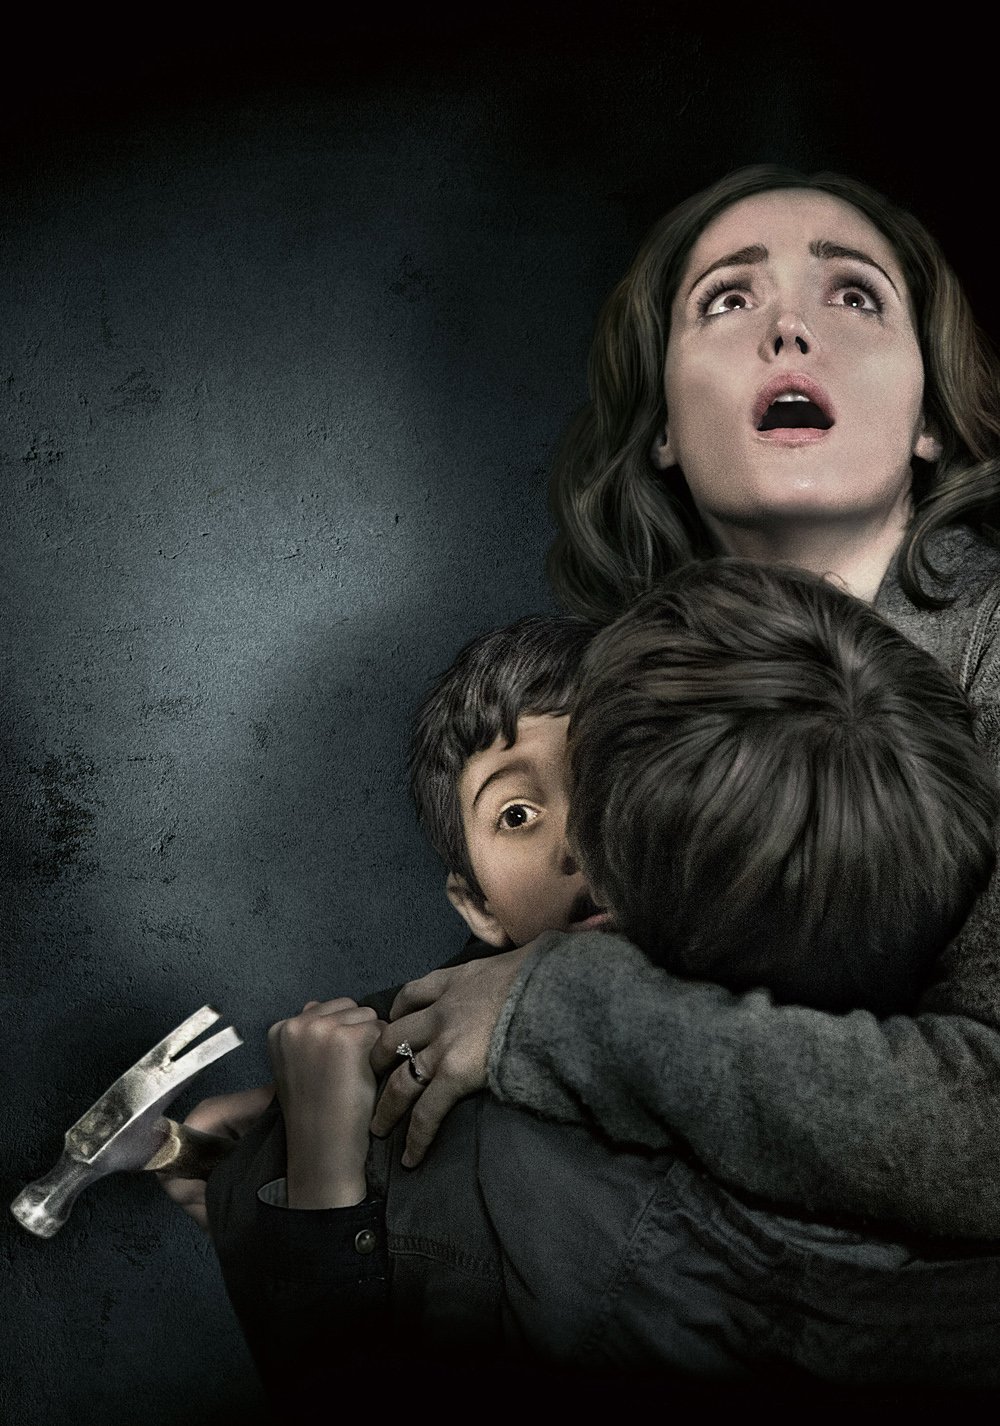 insidious 2 full movie download